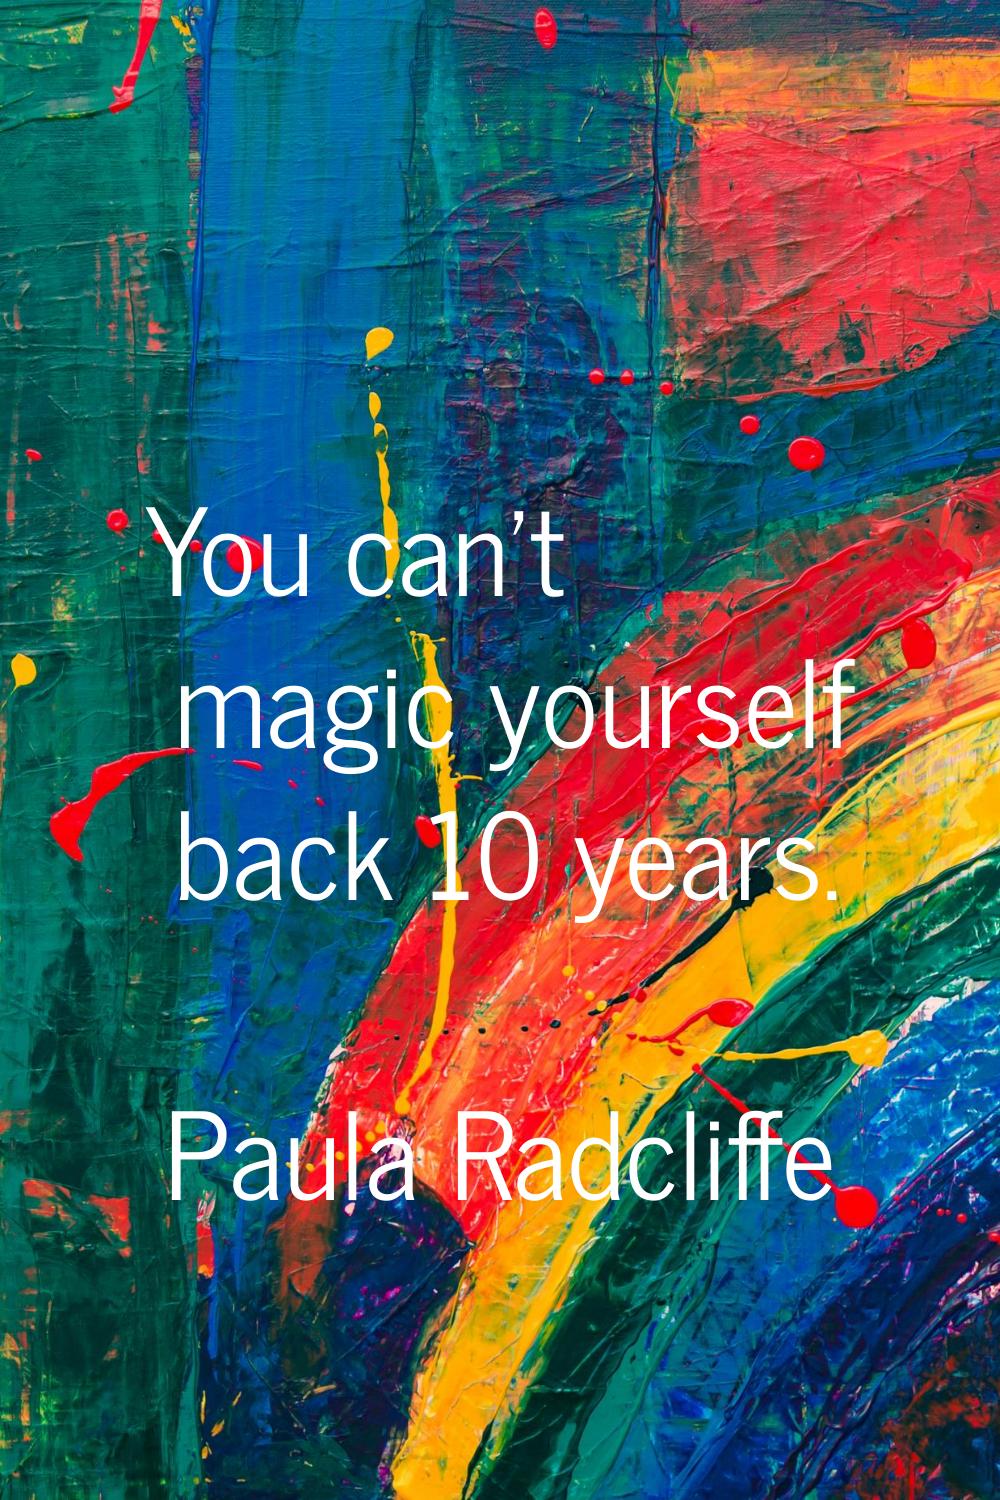 You can't magic yourself back 10 years.